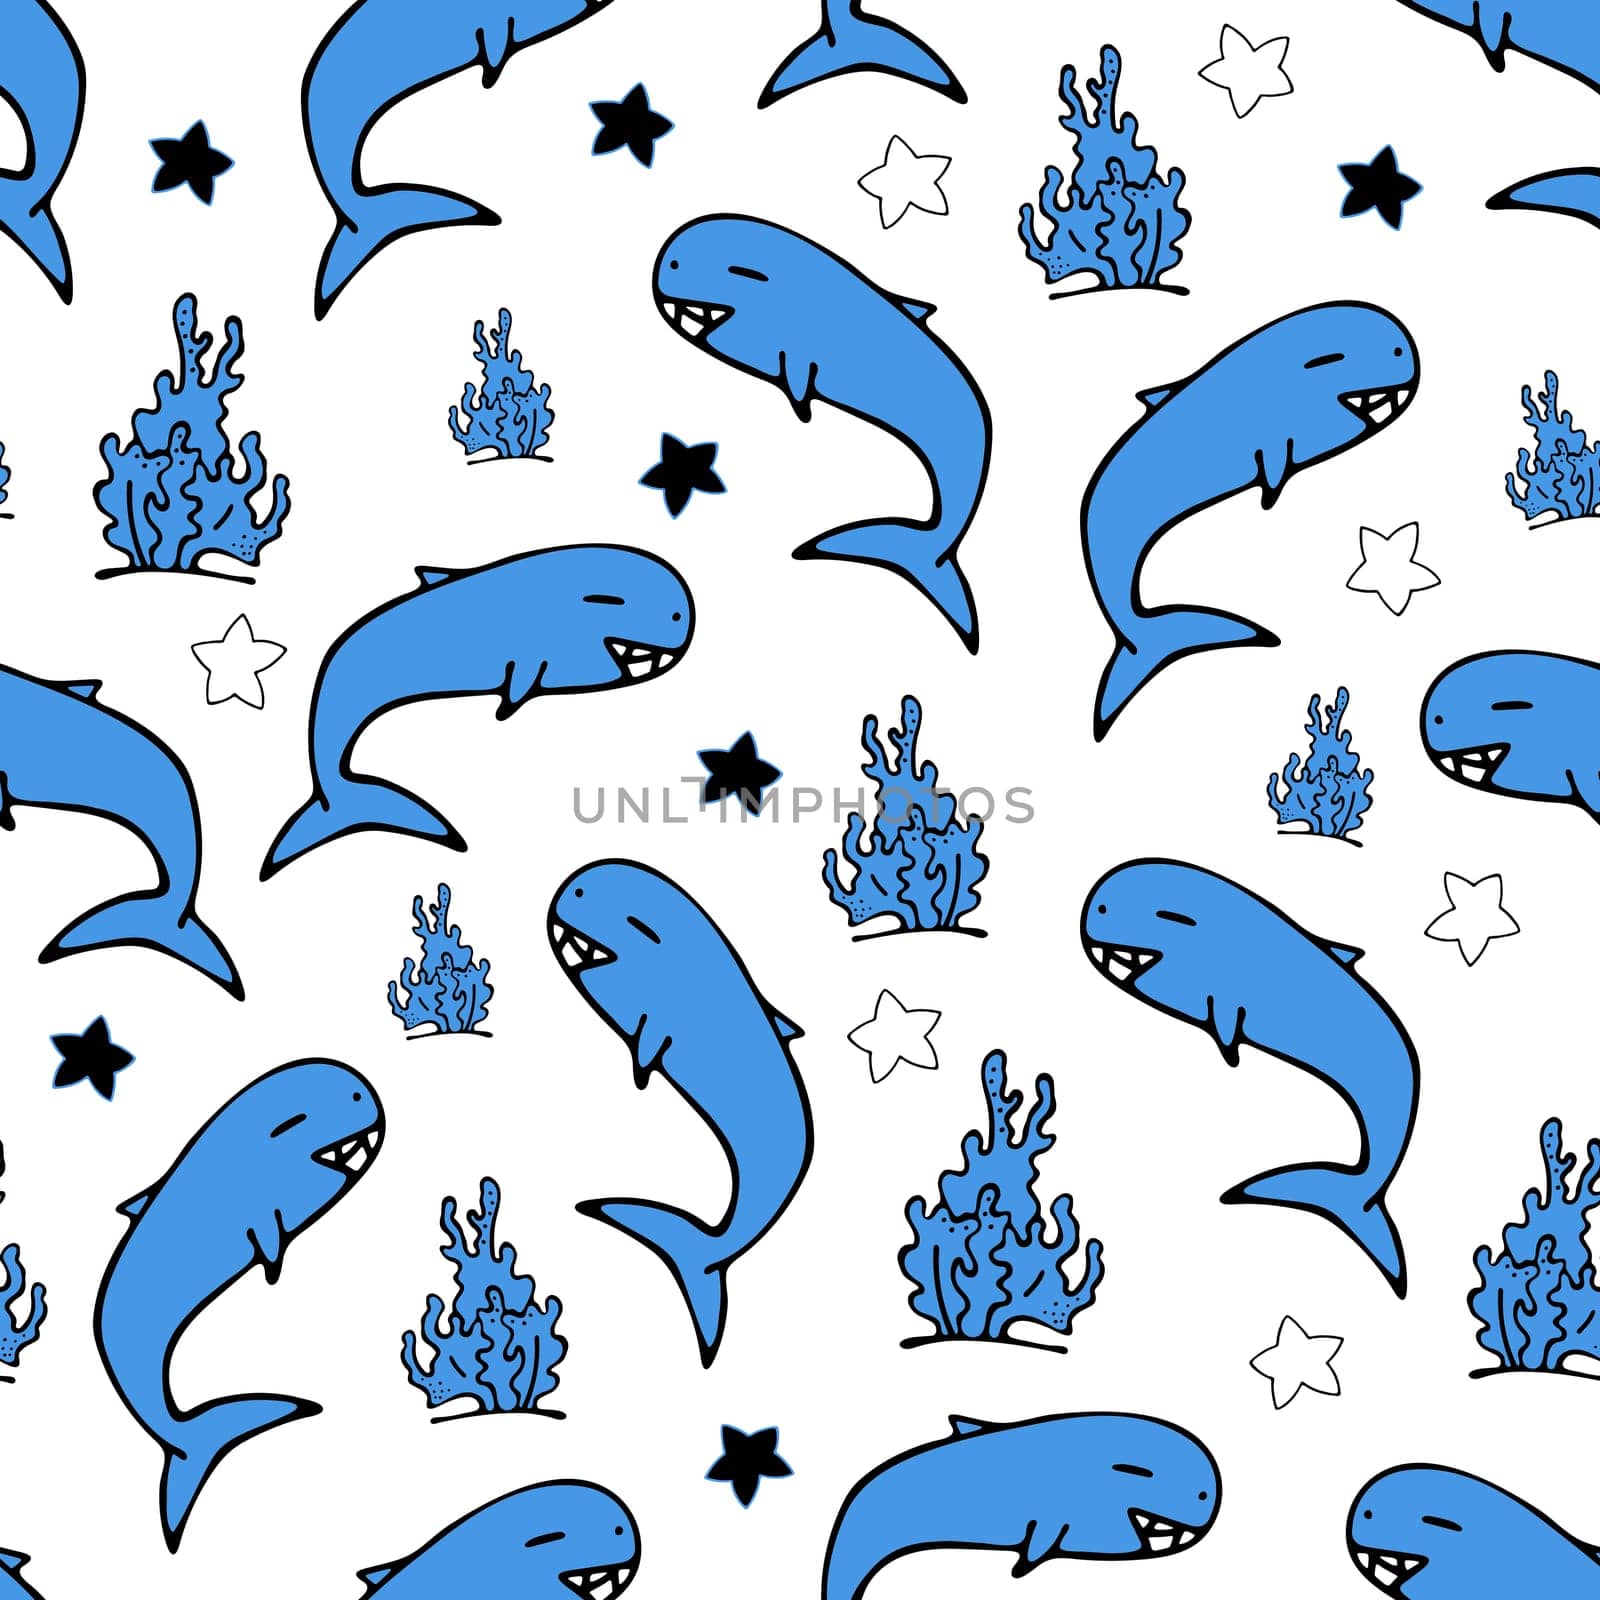 Whales, Corals and Sea Stars Seamless Pattern. Background for Kids with Hand Drawn Doodle Cute Fish. Cartoon Sea Animals Simple Illustration.